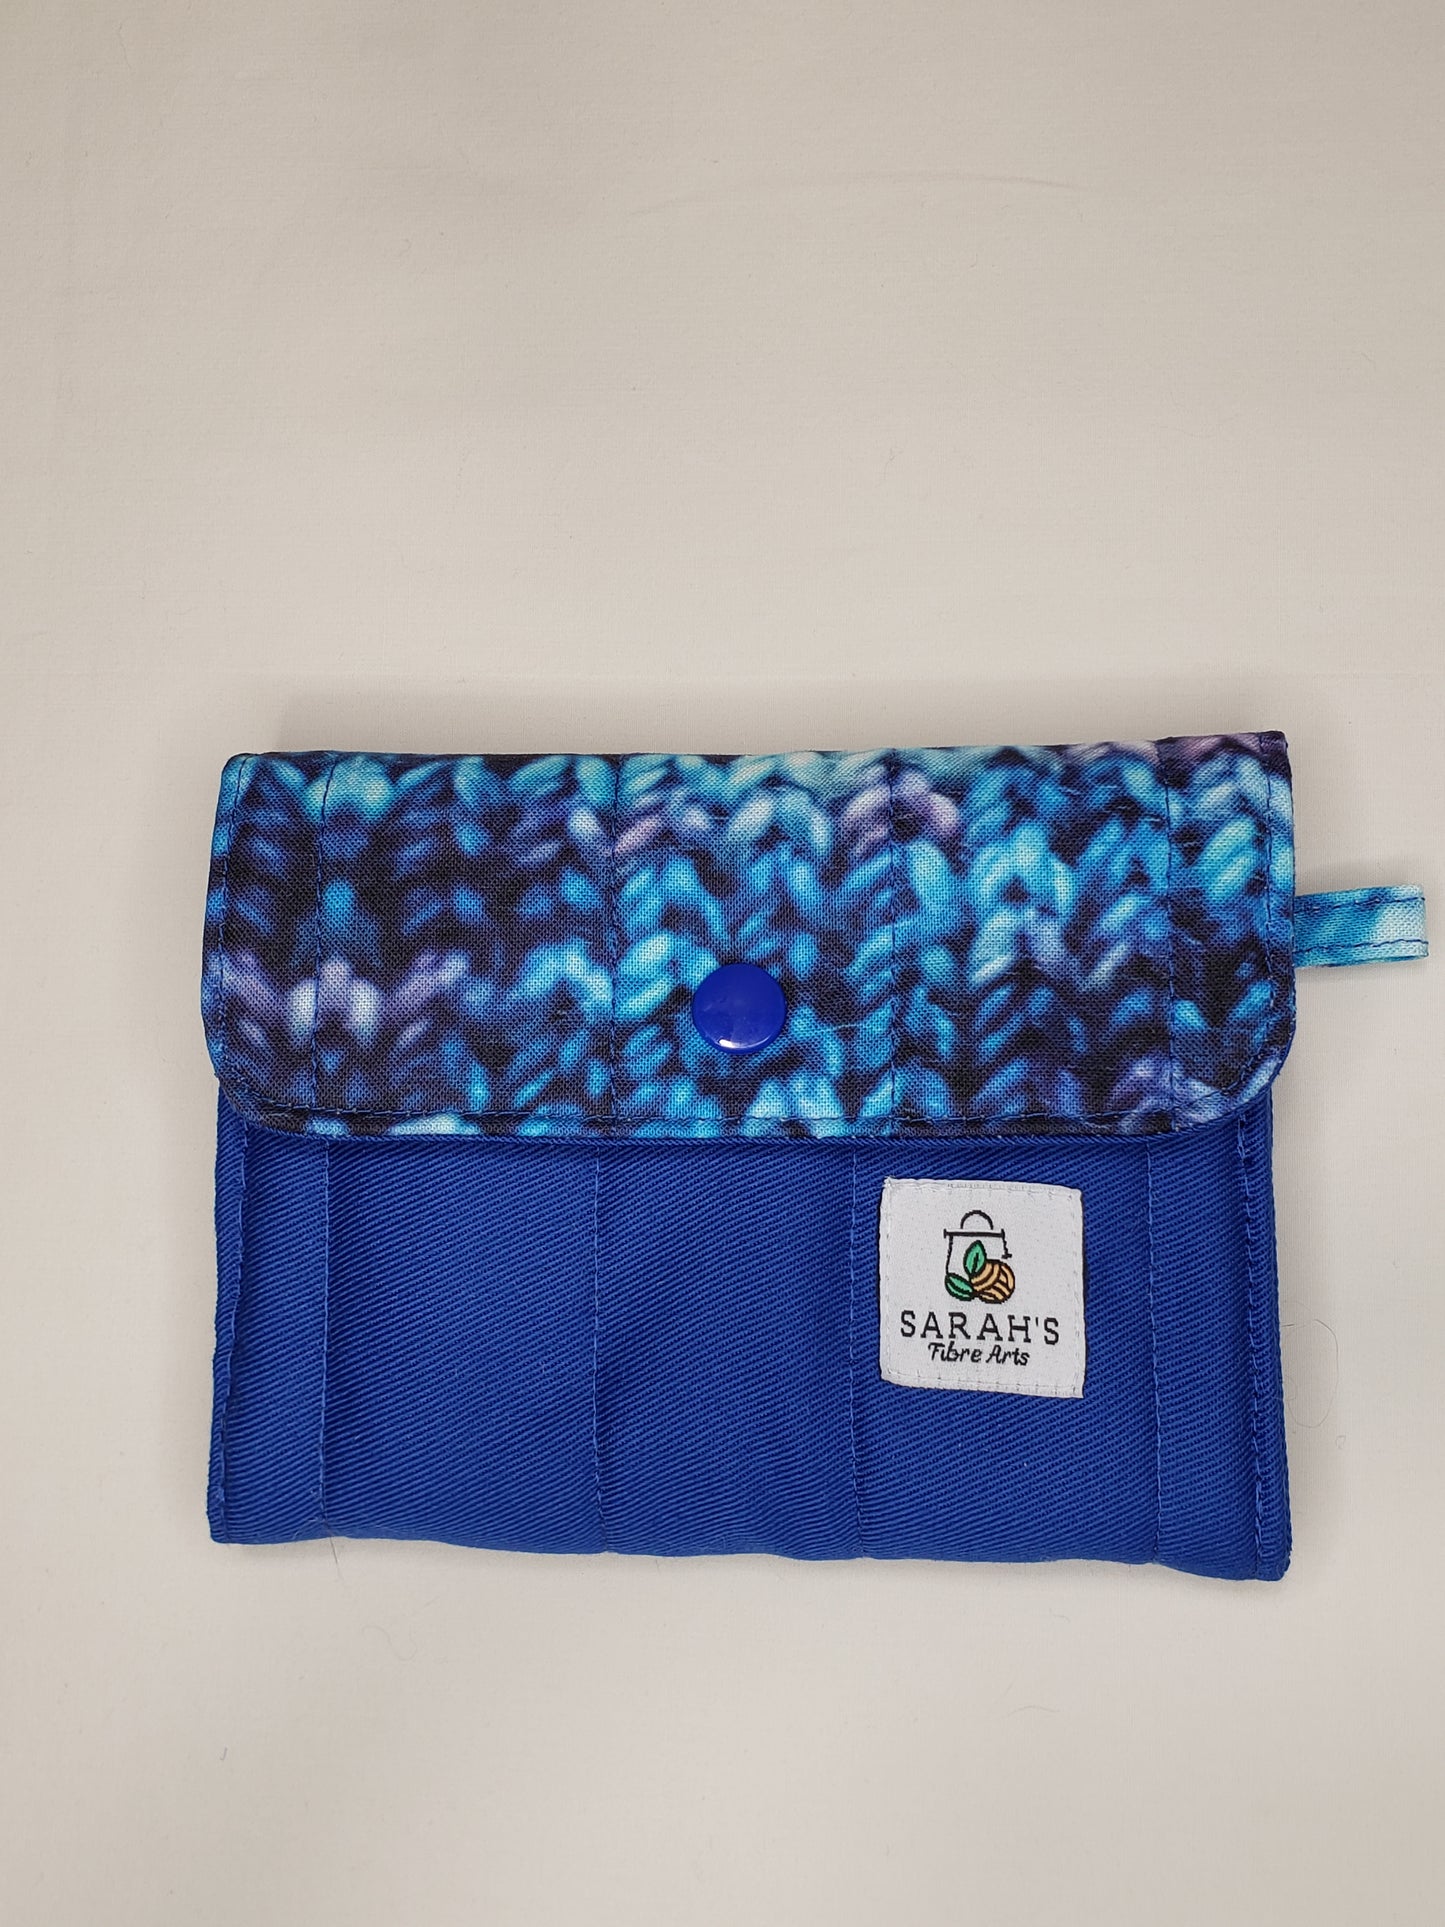 Wallet, Blue small wallet, Coin purse, Small Wallet, Change Purse, Card Holder, Notions Bag